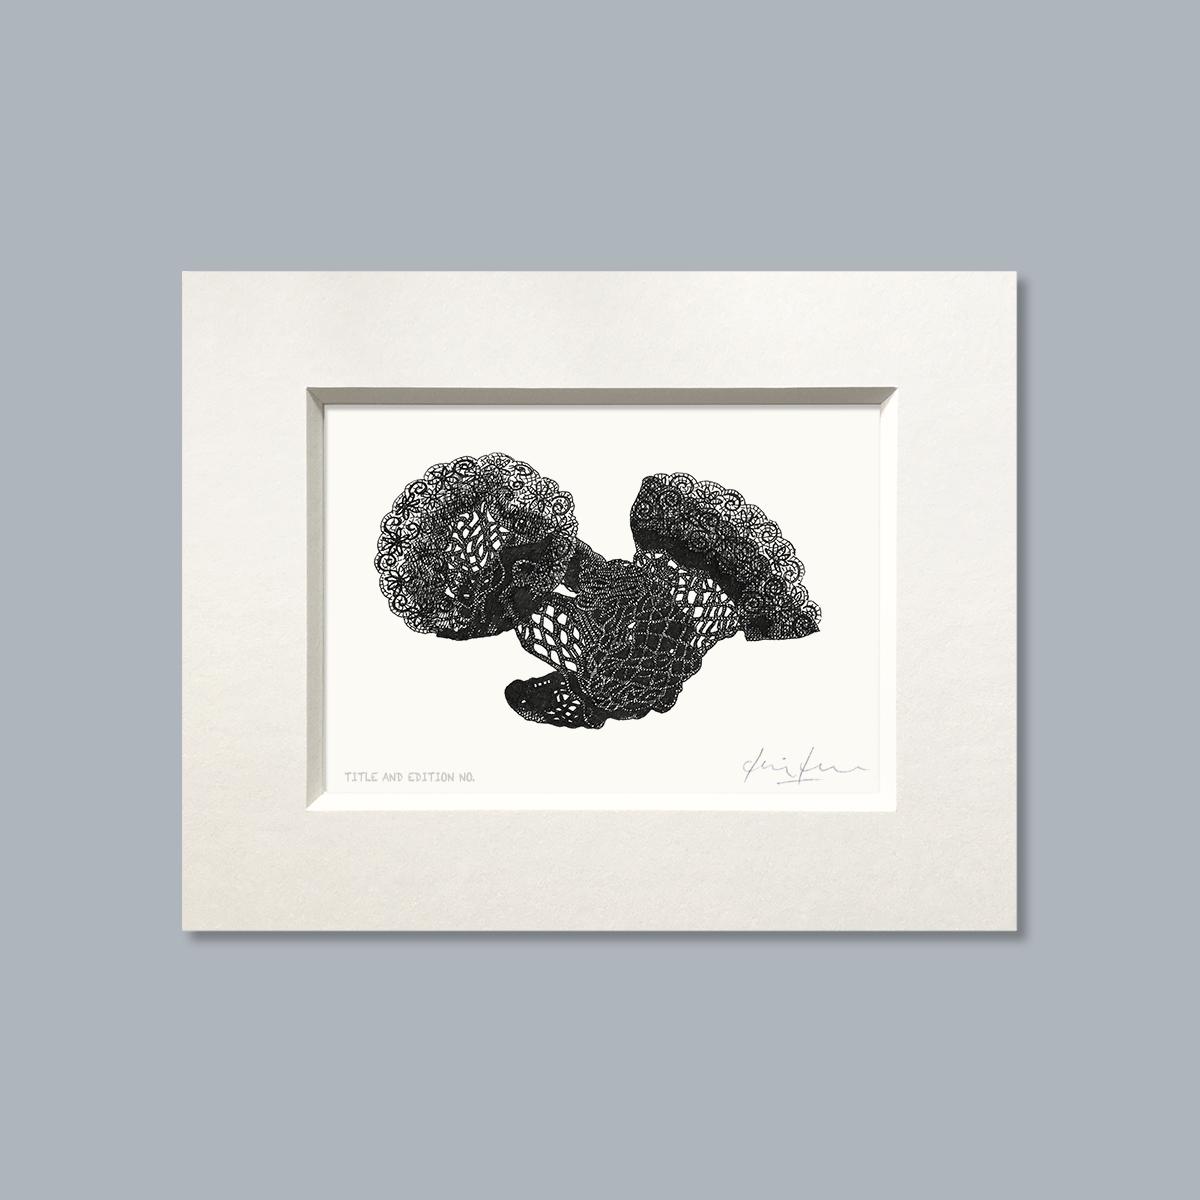 Limited edition print from pen and ink drawing of a pair of discarded fishnet stockings in a white mount